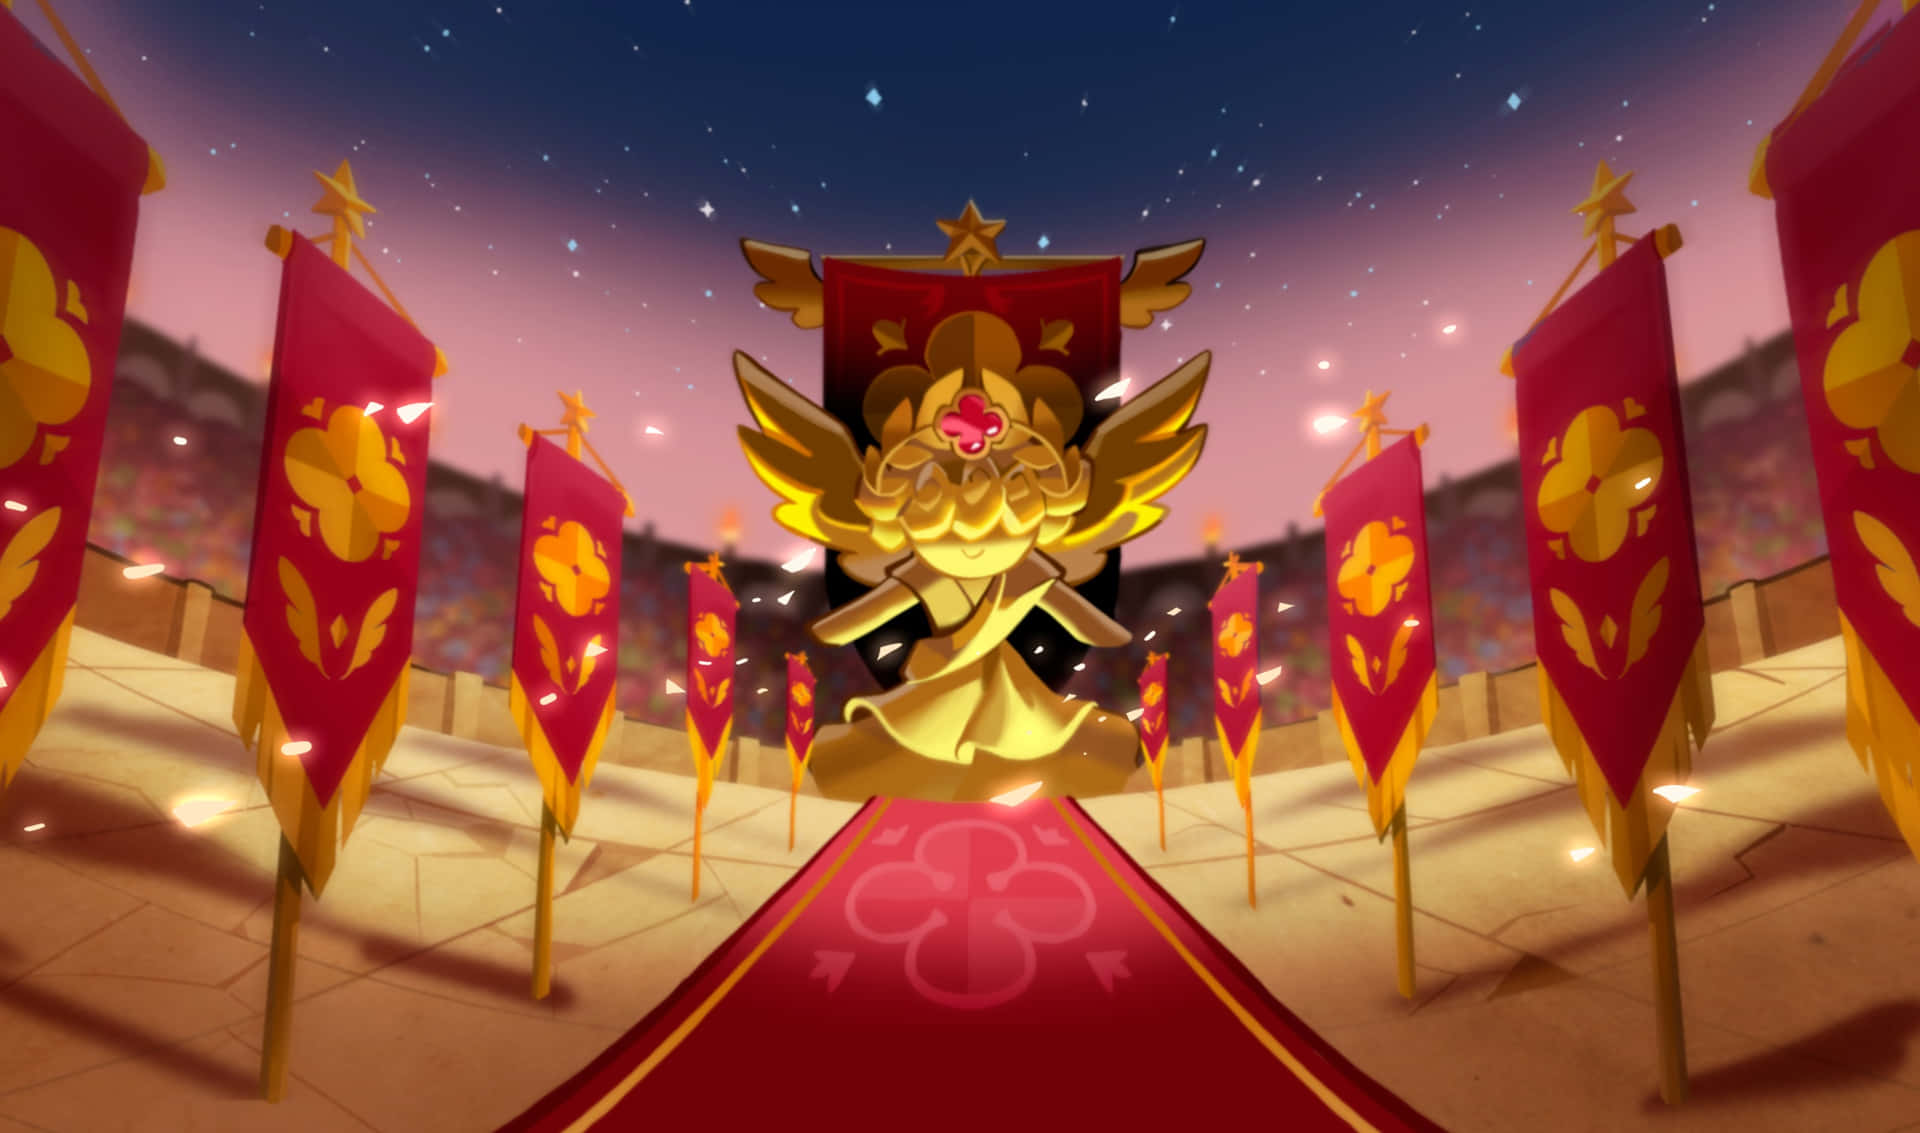 A Cartoon Image Of A Golden Throne With Flags